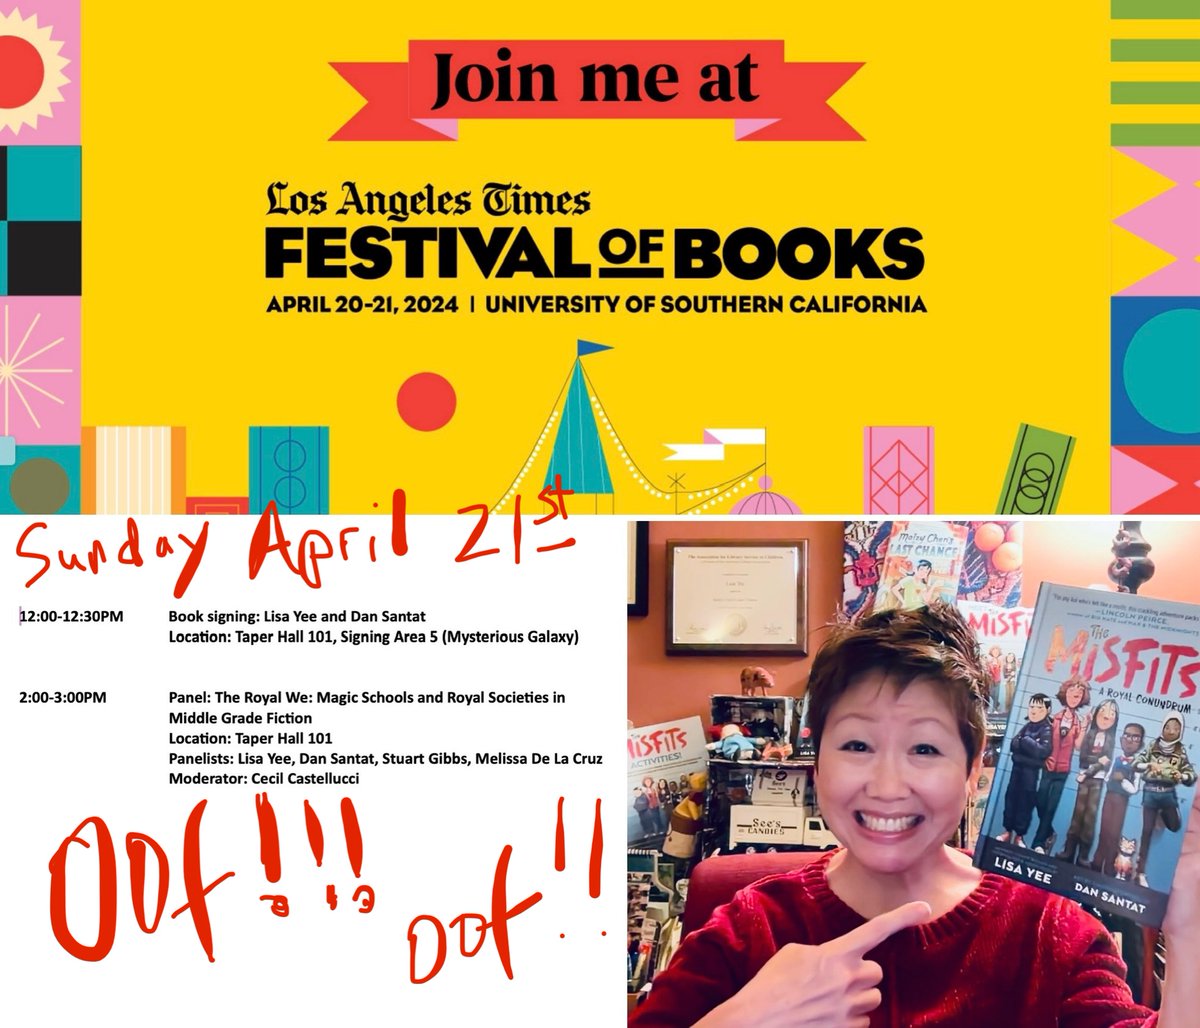 Hey, LA! I'll be at the @latimesfob next weekend on a panel with amazing authors, and signing THE MISFITS at the @MystGalaxyBooks. Here's where you can find me! @randomhousekids #Misfits @misscecil @dsantat @MelissadelaCruz @AuthorStuGibbs